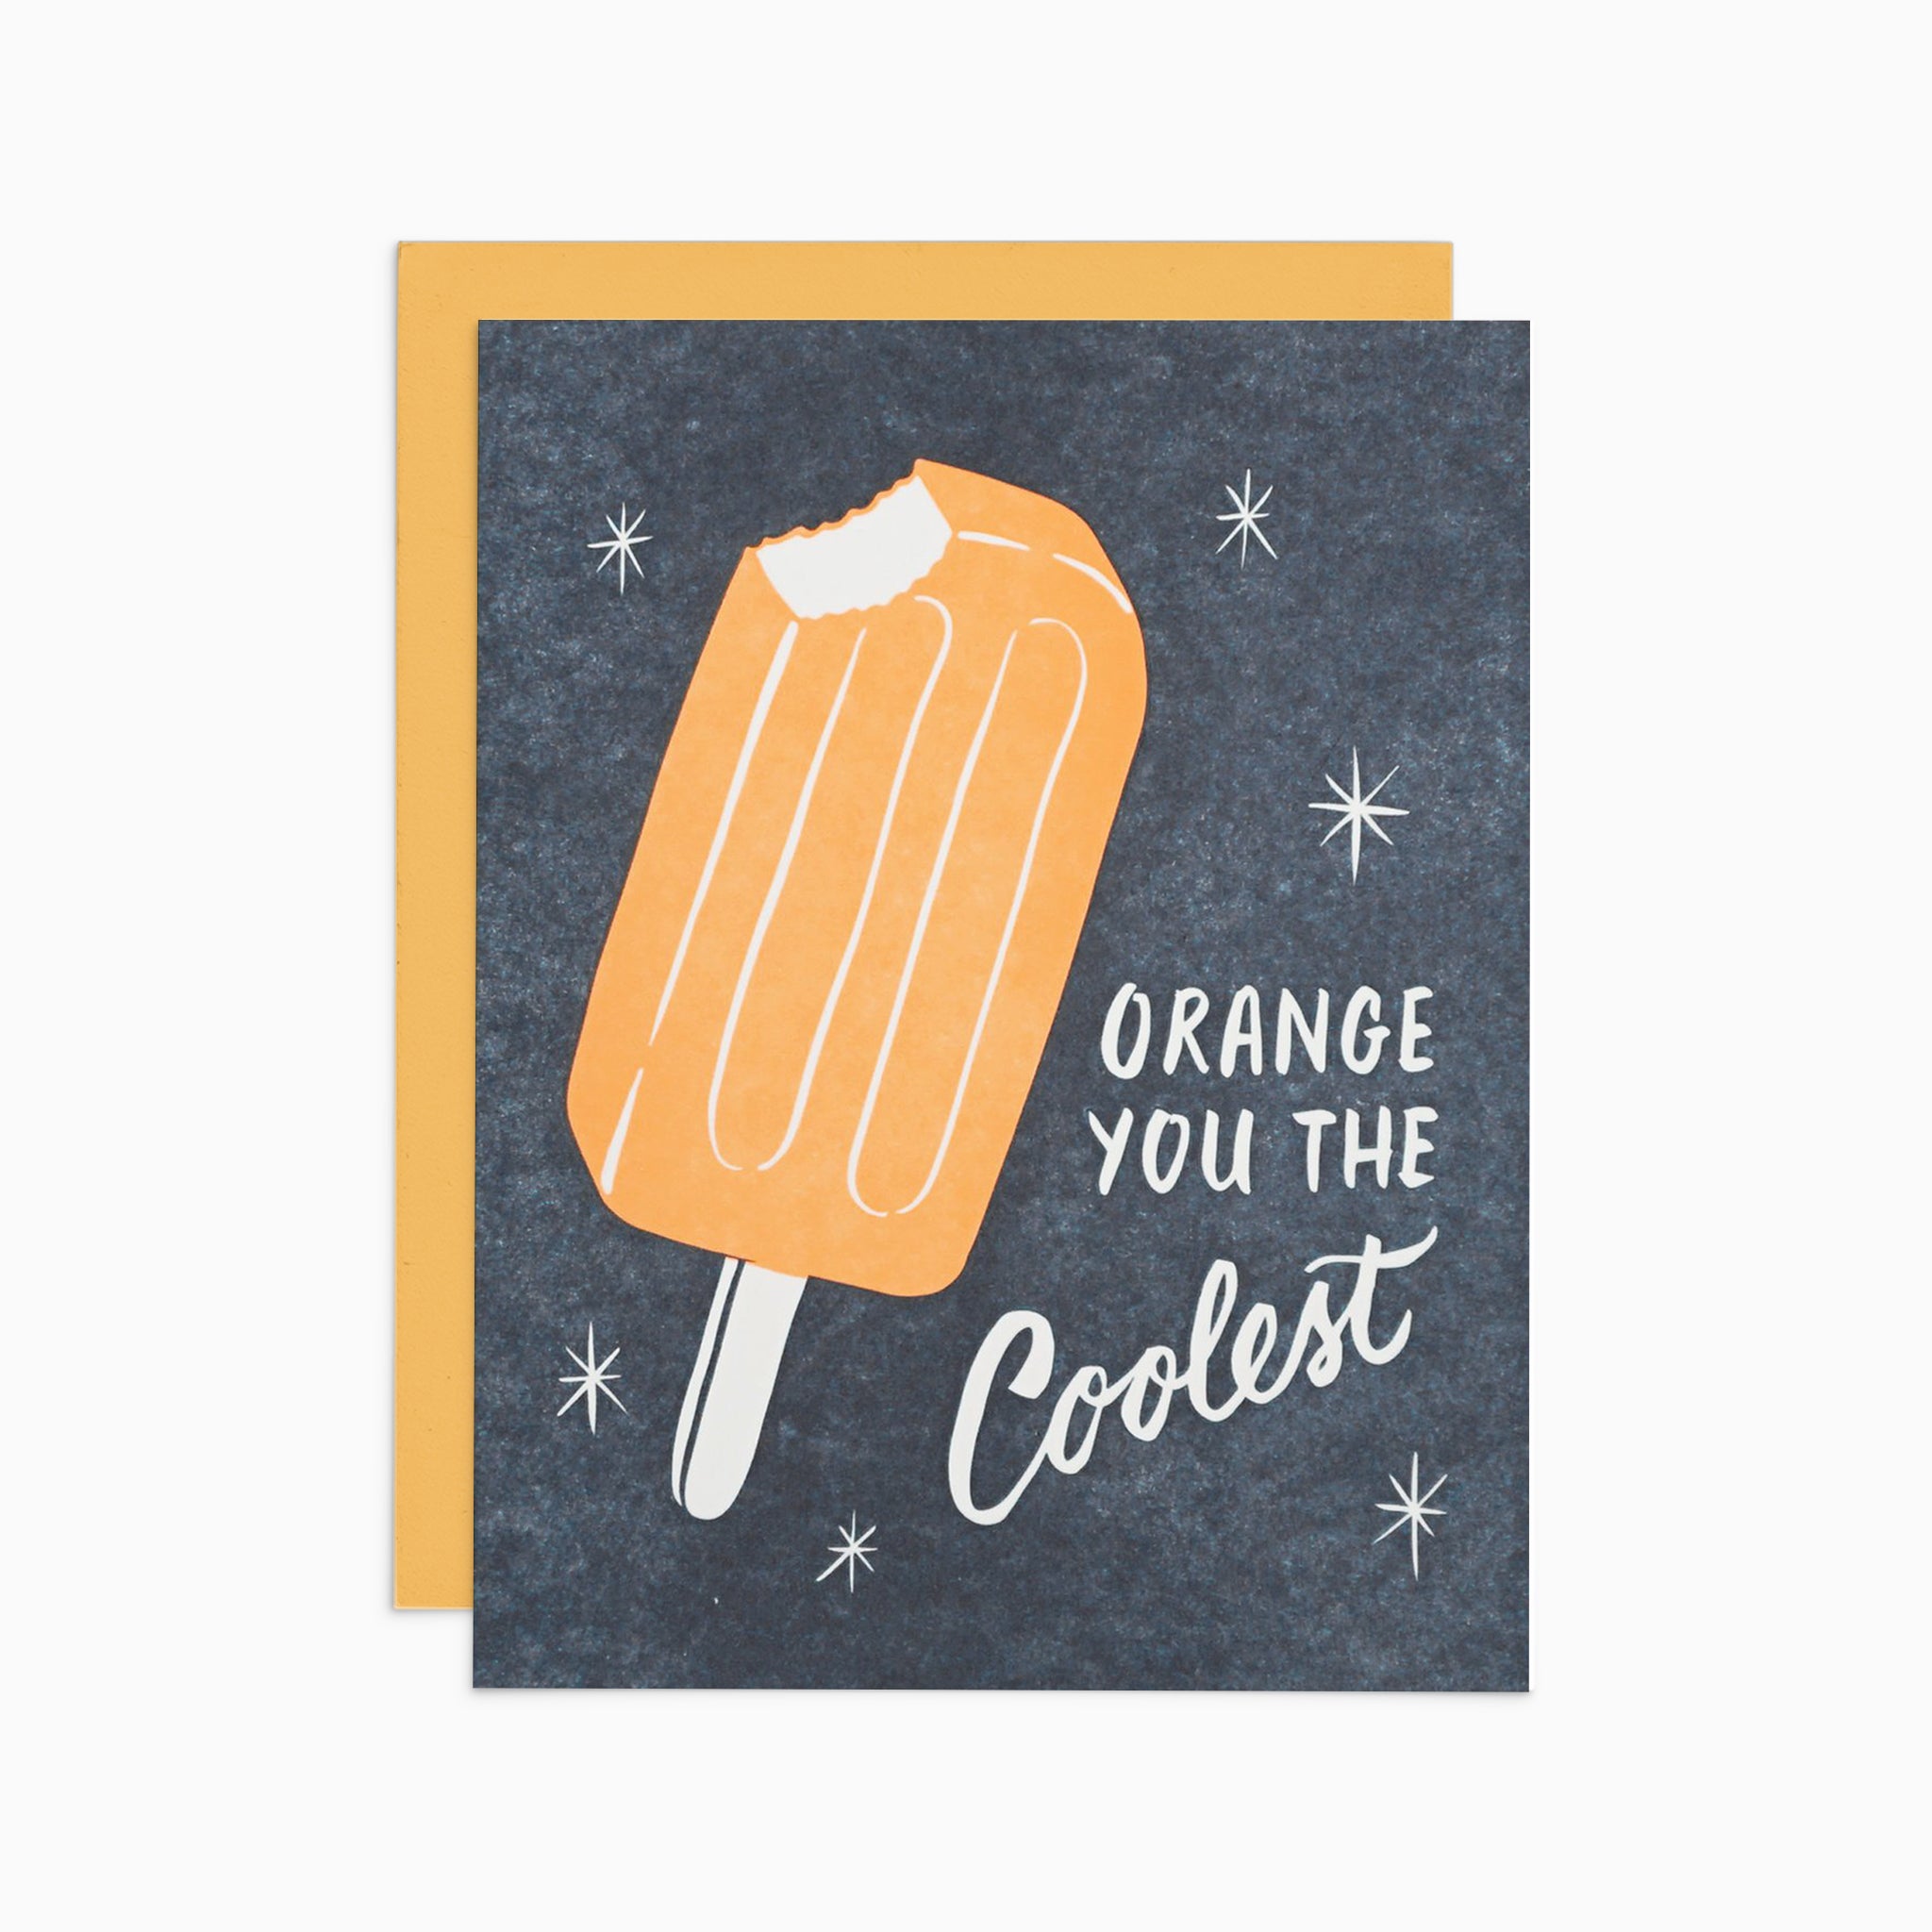 Orange You the Coolest Card